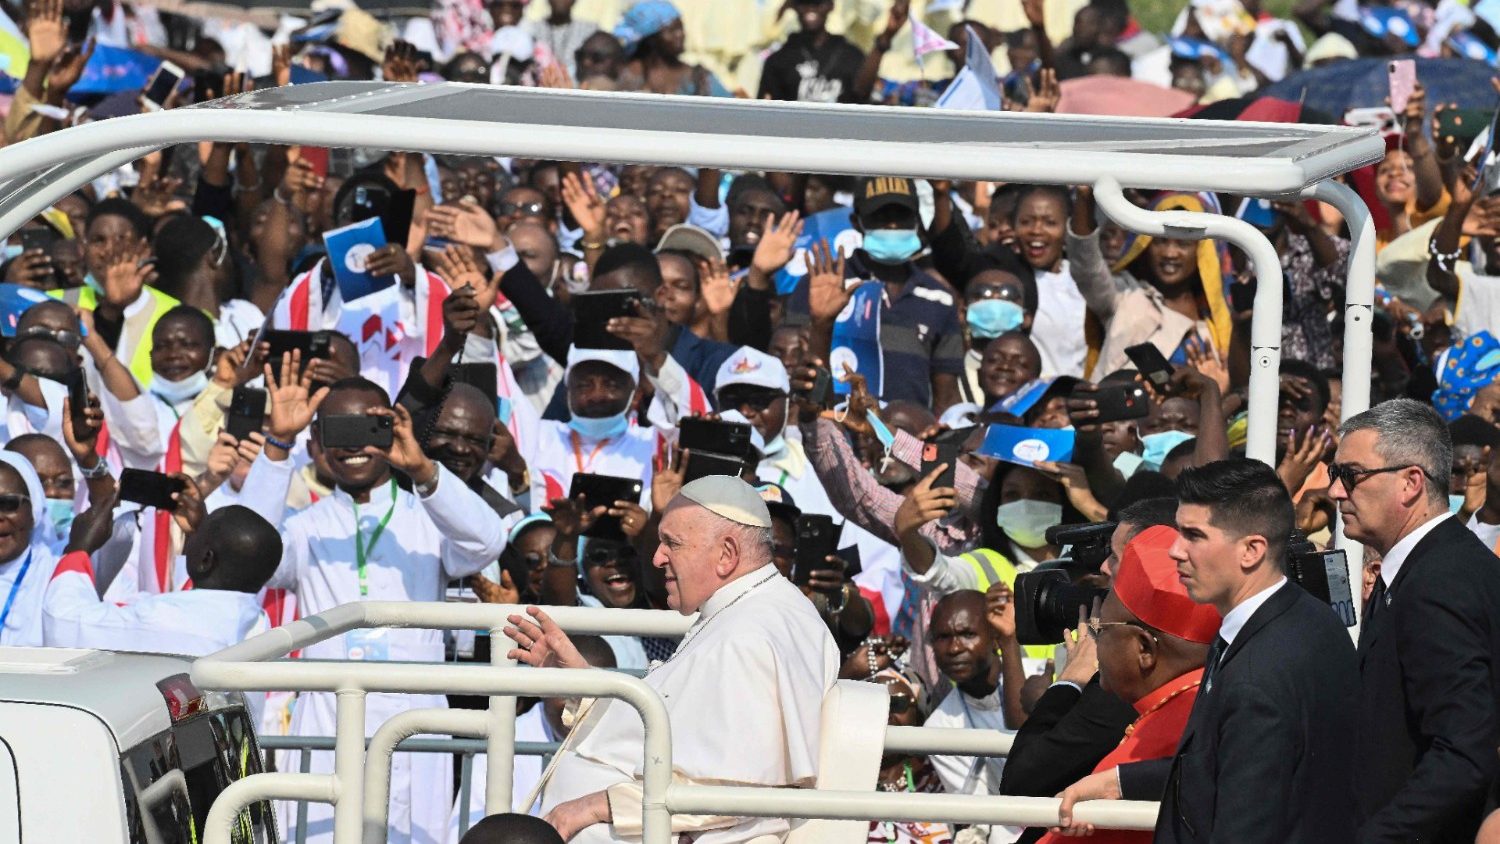 Mass in Kinshasa Francis invites Congolese to cultivate peace and